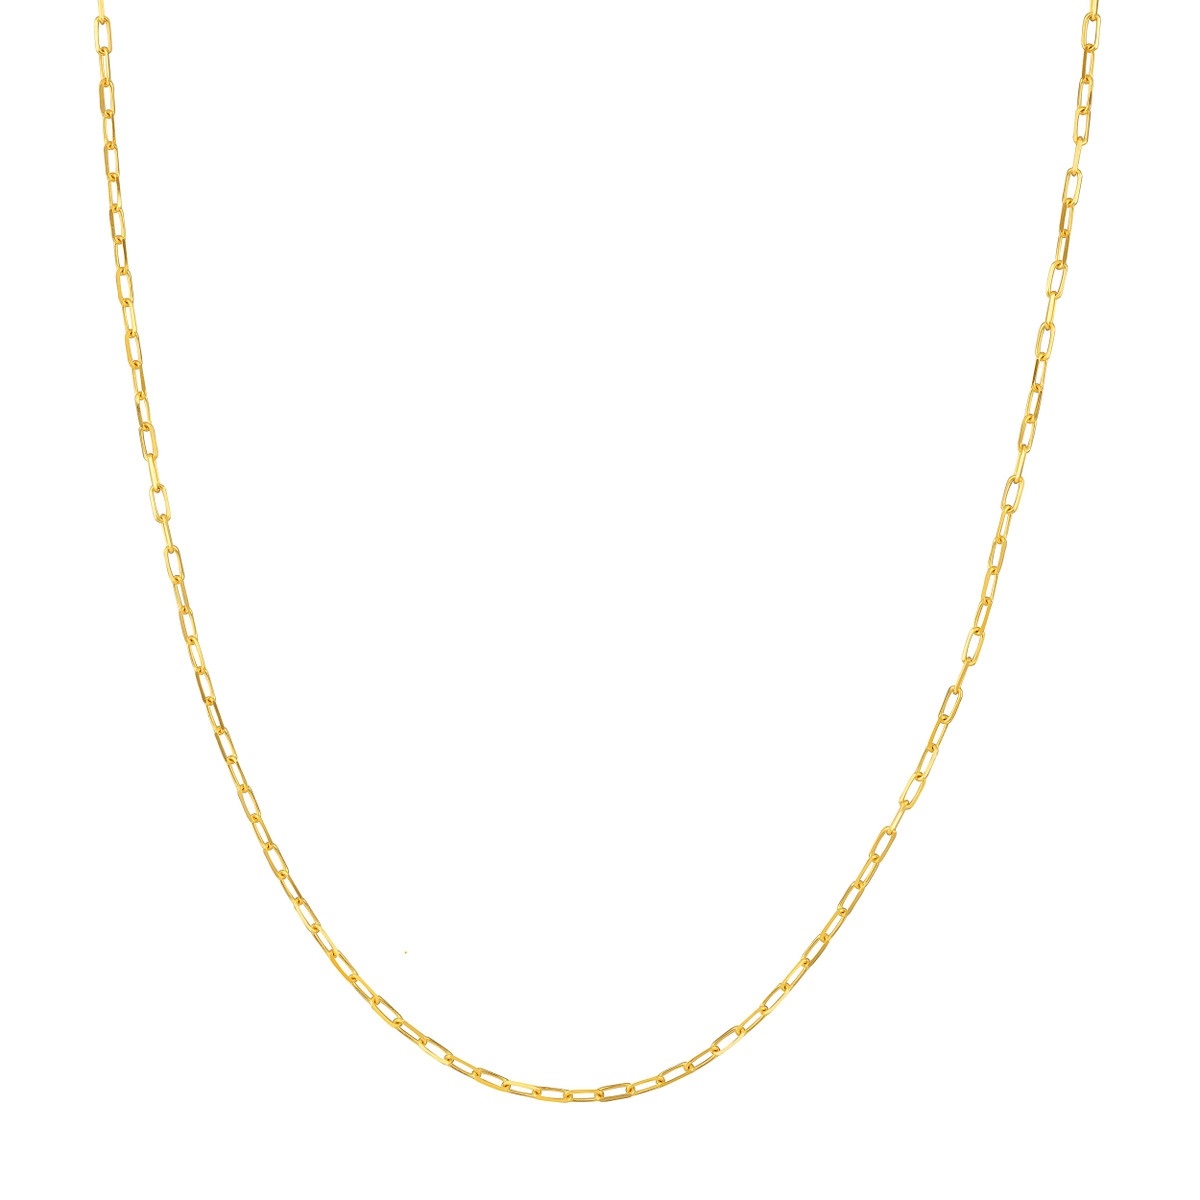 Korman Signature 14kt Yellow Gold Thin Paperclip Chain